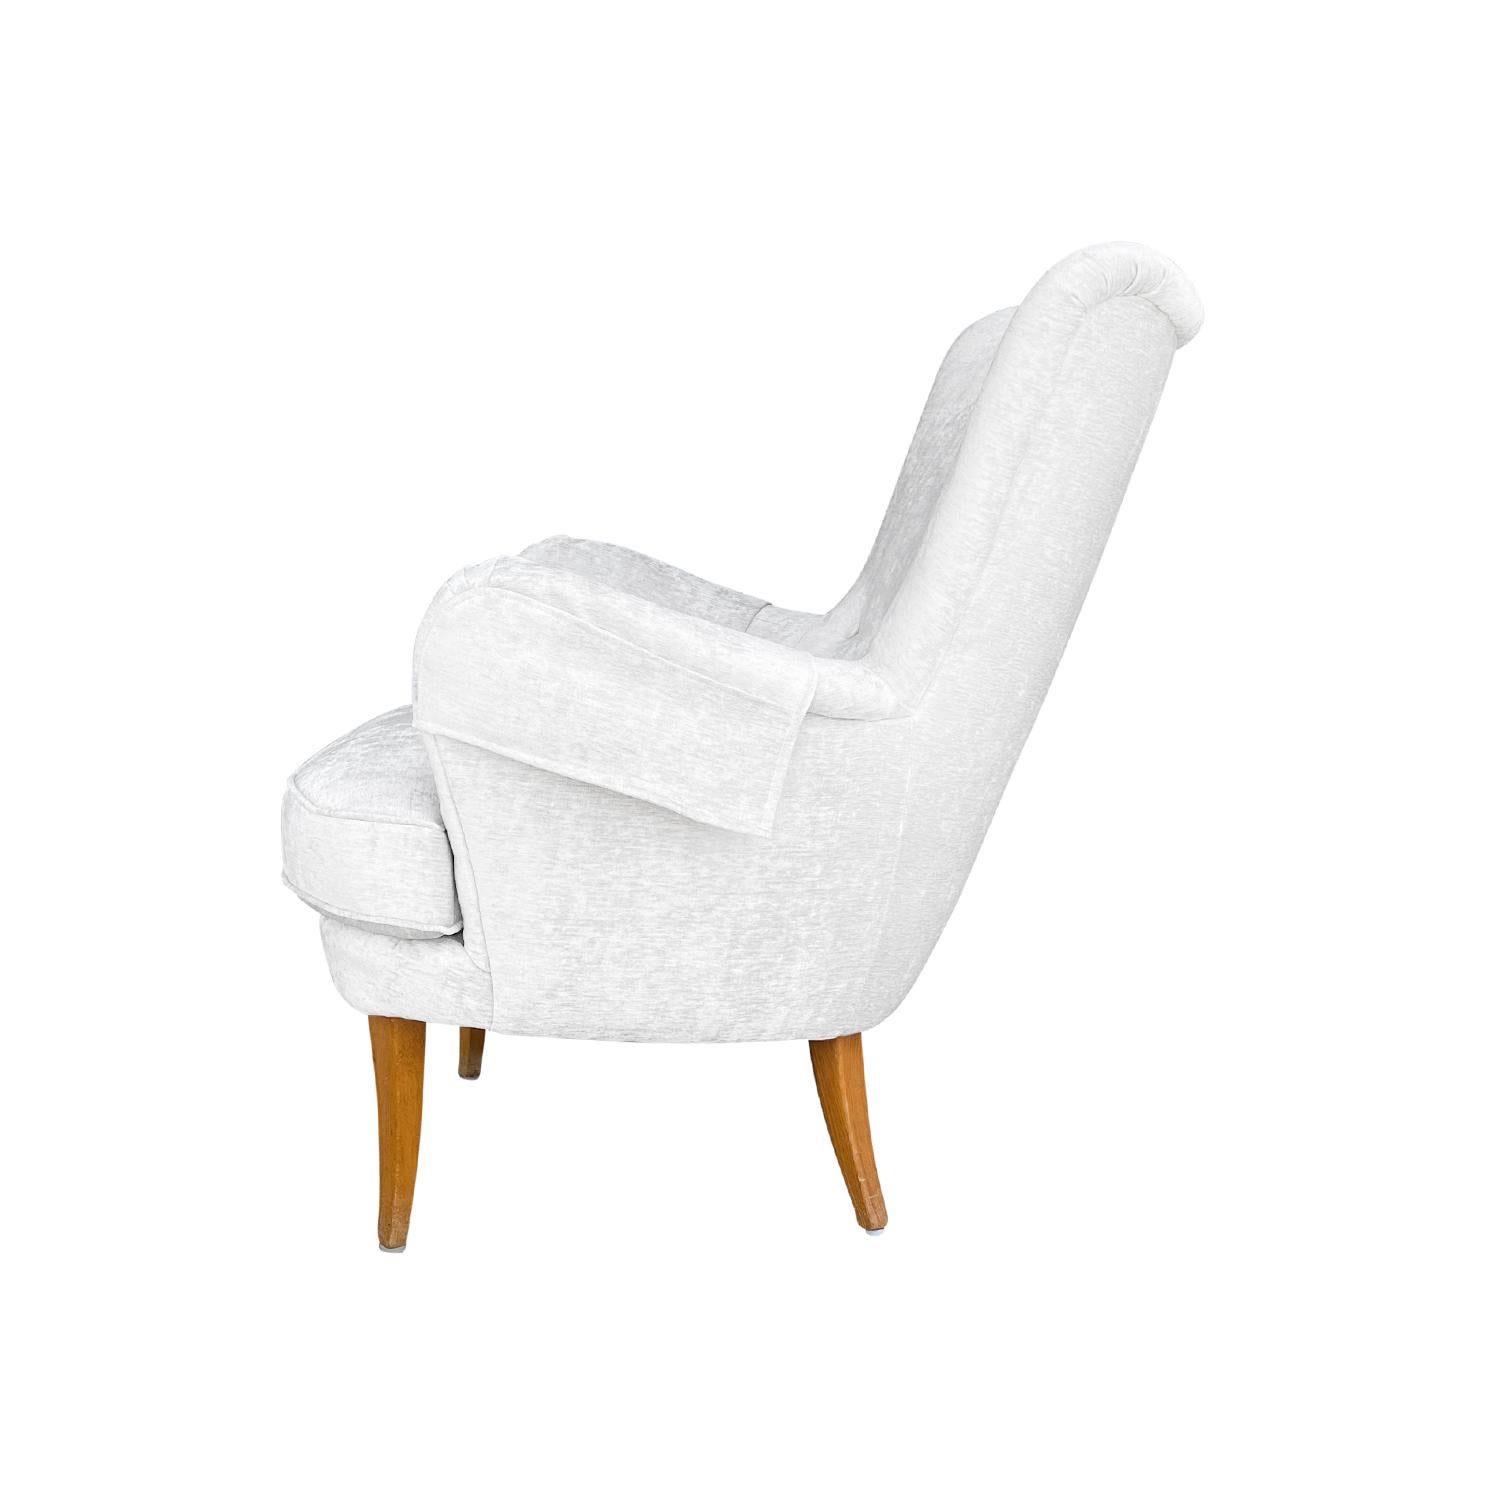 20th Century Single Swedish Armchair - Vintage Side Chair by Carl Malmsten In Good Condition For Sale In West Palm Beach, FL